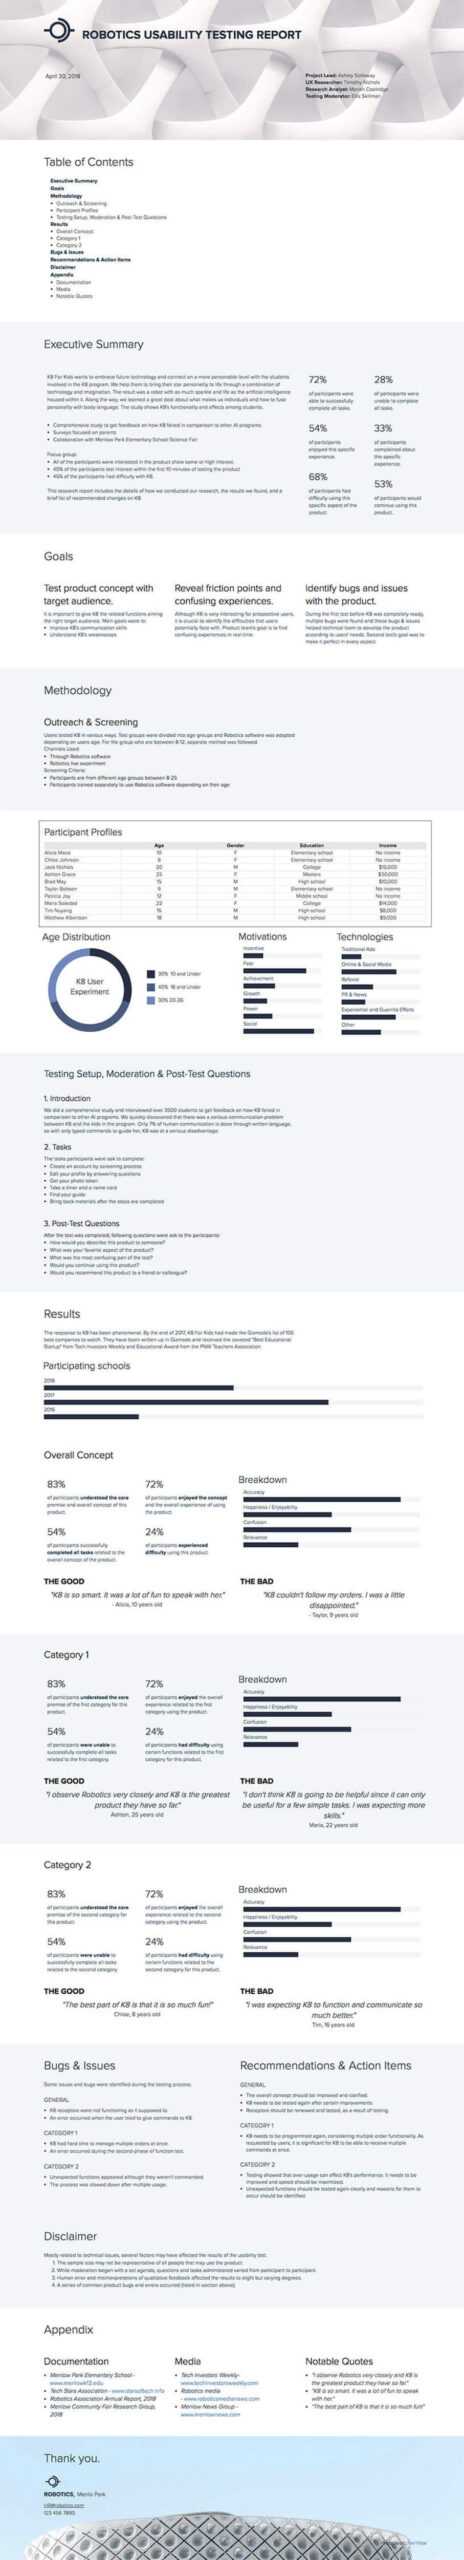 How To Write A Usability Testing Report (With Samples) | Xtensio Intended For Usability Test Report Template